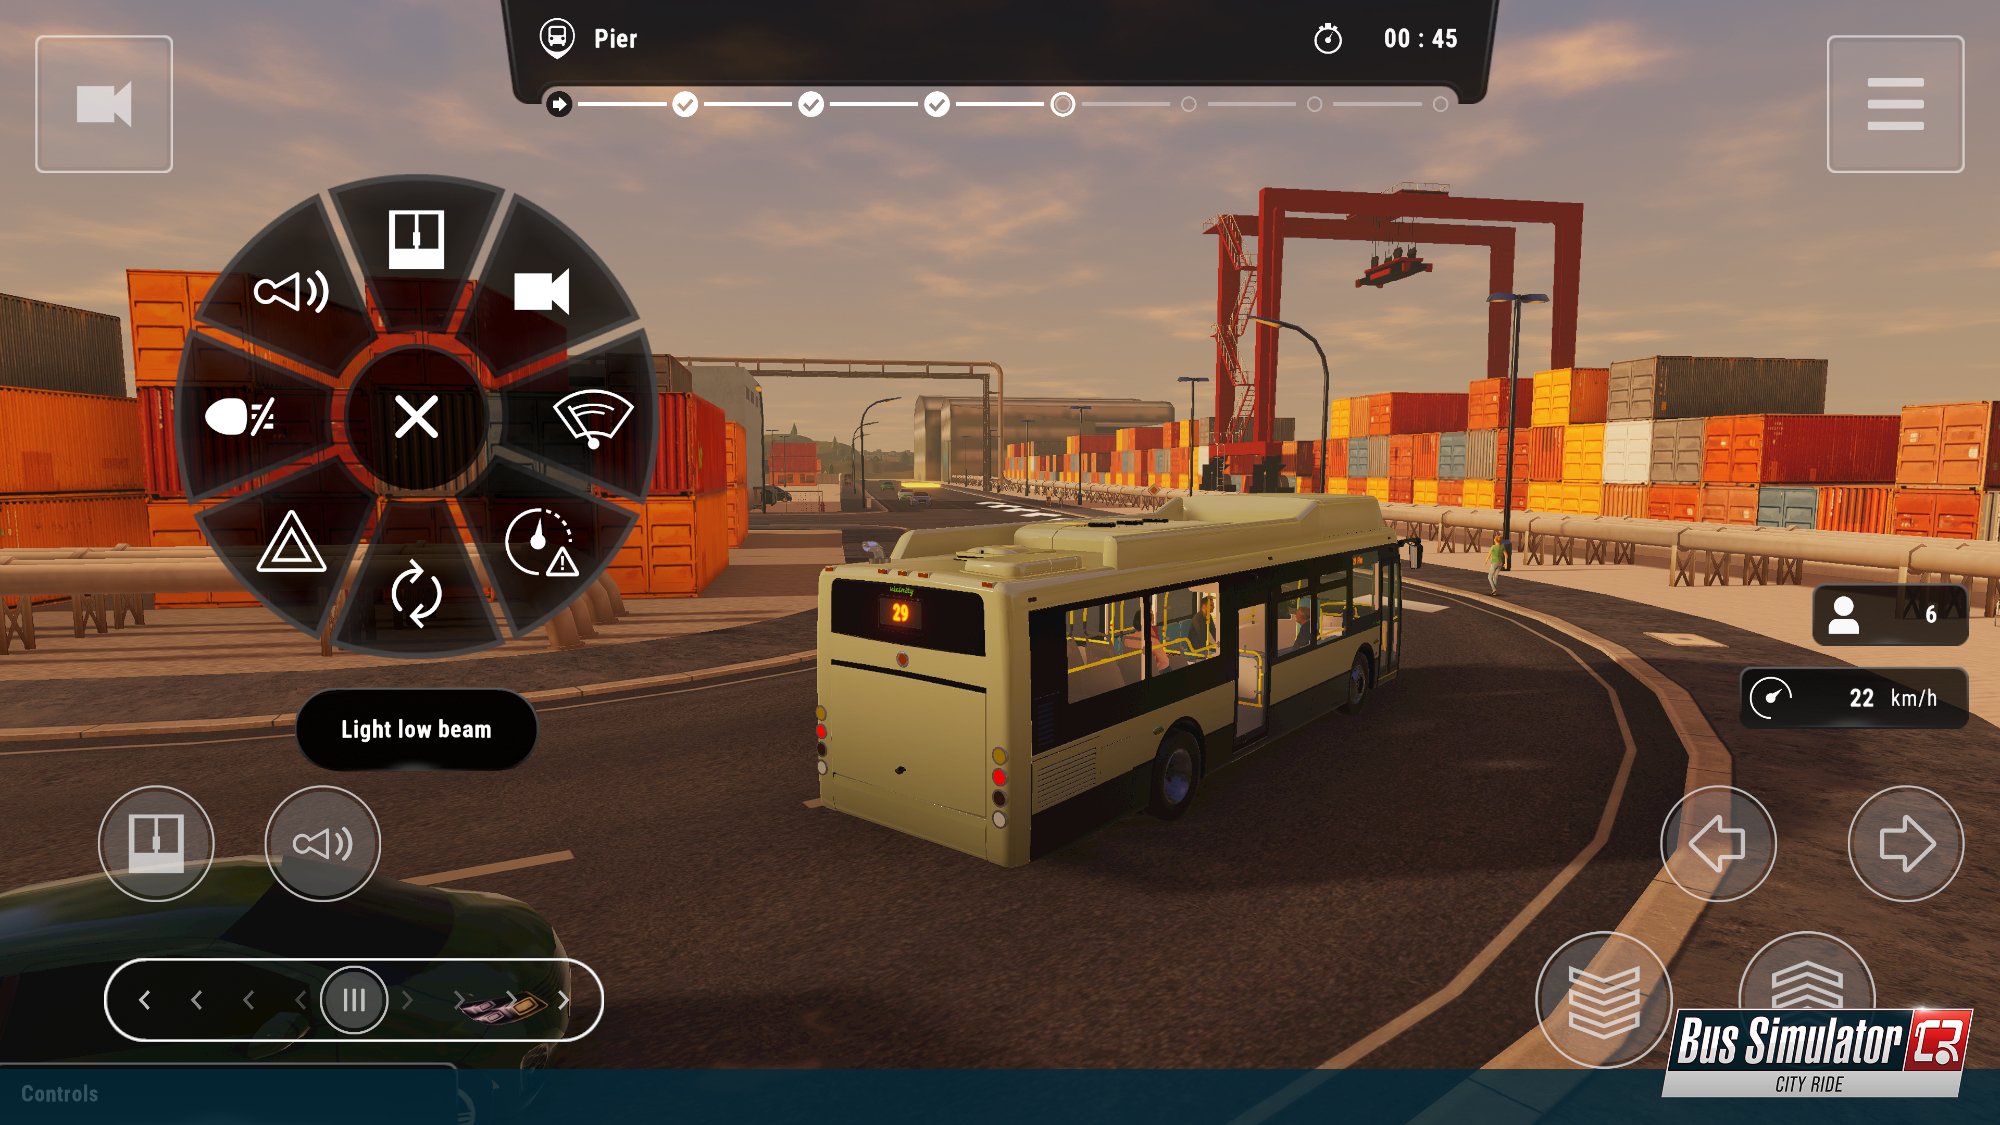 Bus Simulator City Ride Is Out Now on iOS and Android